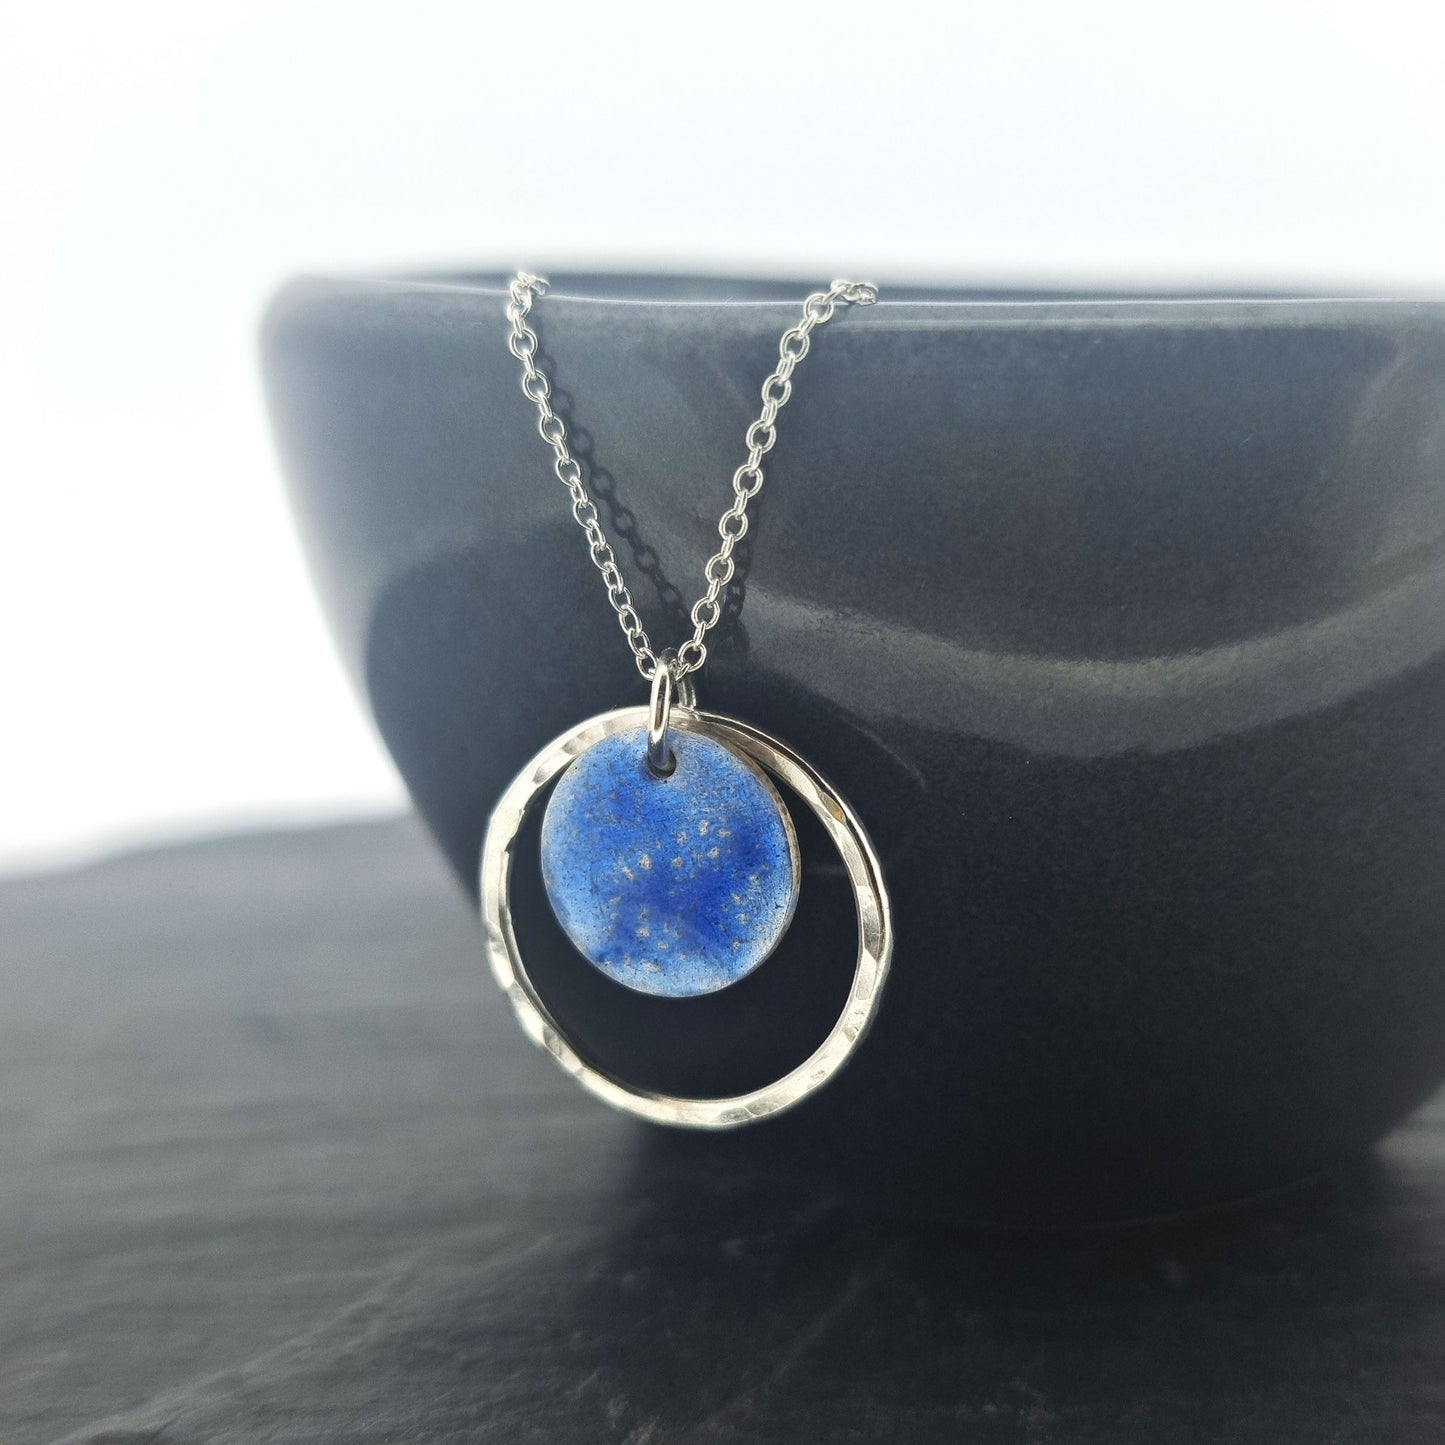 A silver pendant with a central disc with a blue patterned enamel surrounded by a silver hammered open circle. On a silver chain. Pictured on a black bowl.